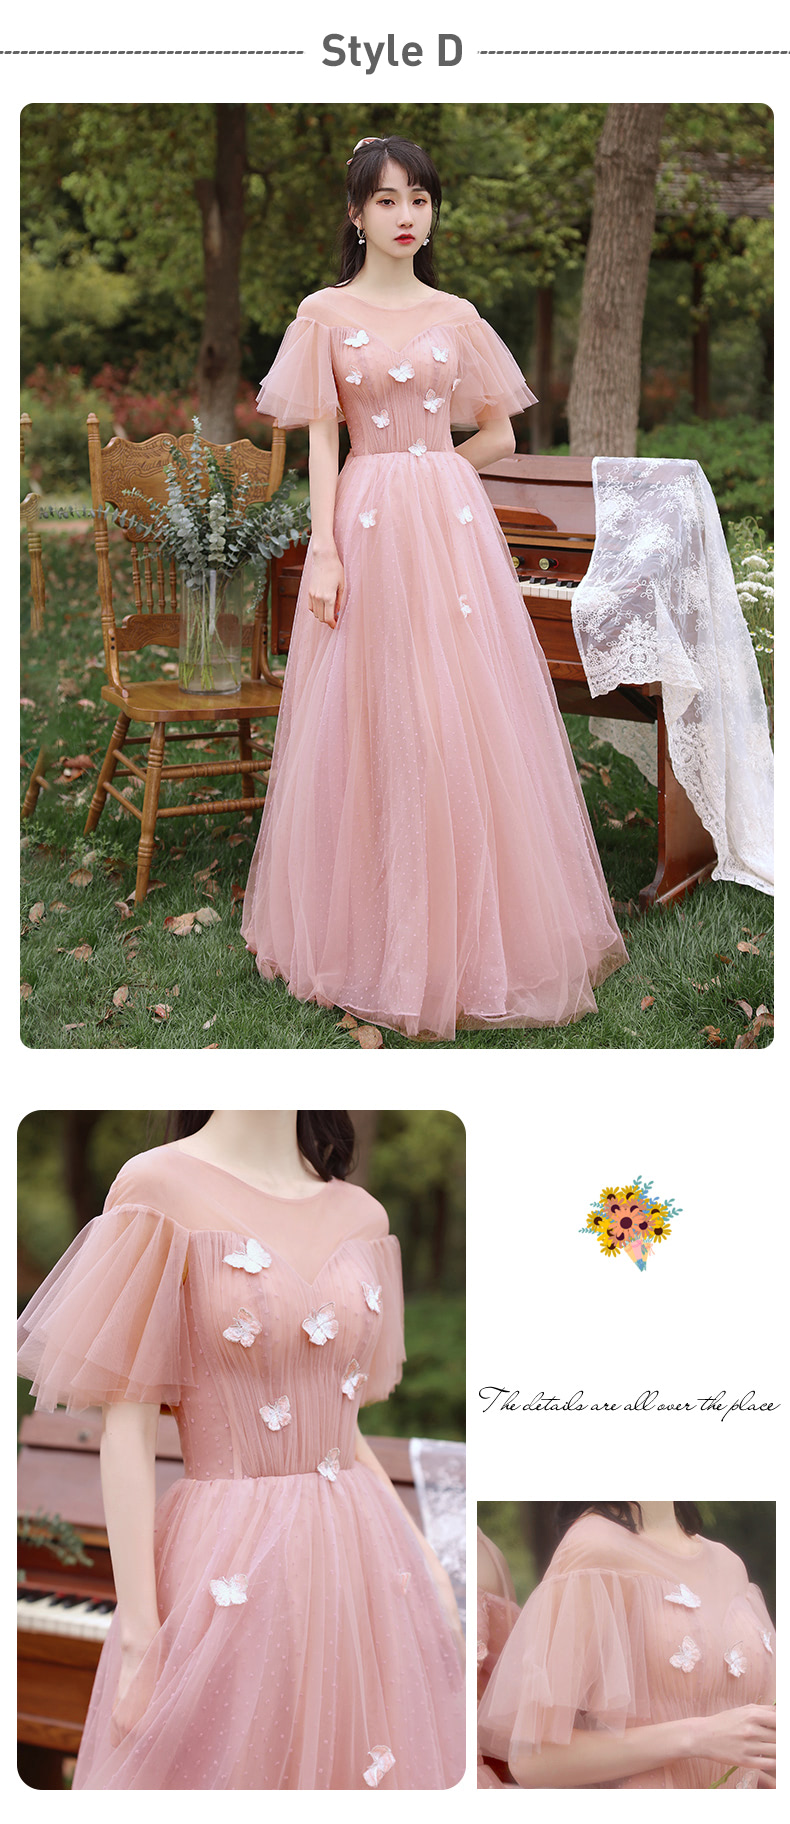 A-Line-Pink-Tulle-Bridesmaid-Formal-Wedding-Guest-Party-Dress21.jpg